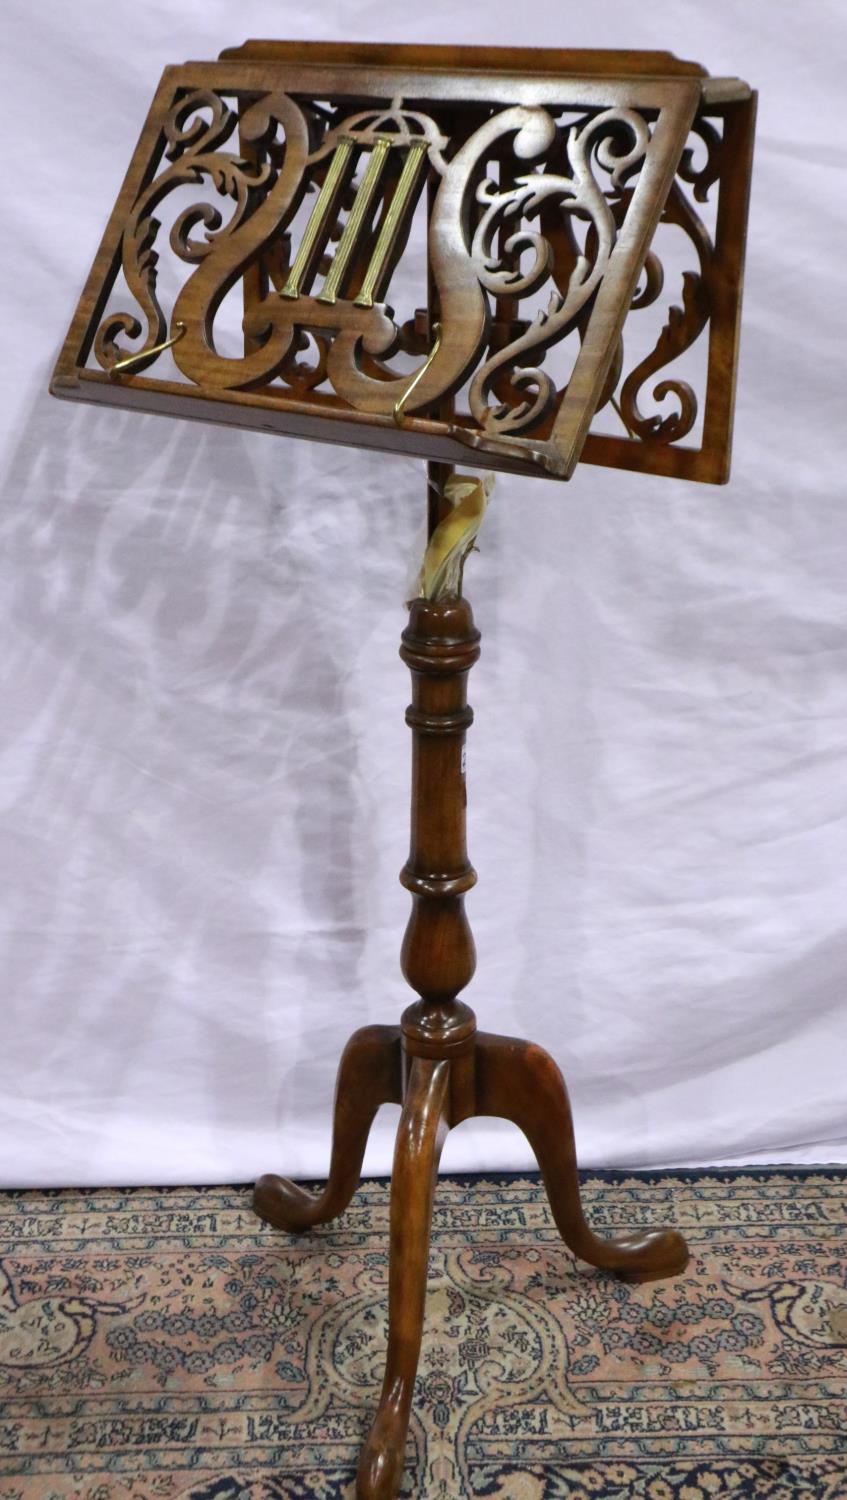 Walnut music stand on tripod supports with pad feet, wood is overall in good condition with slight